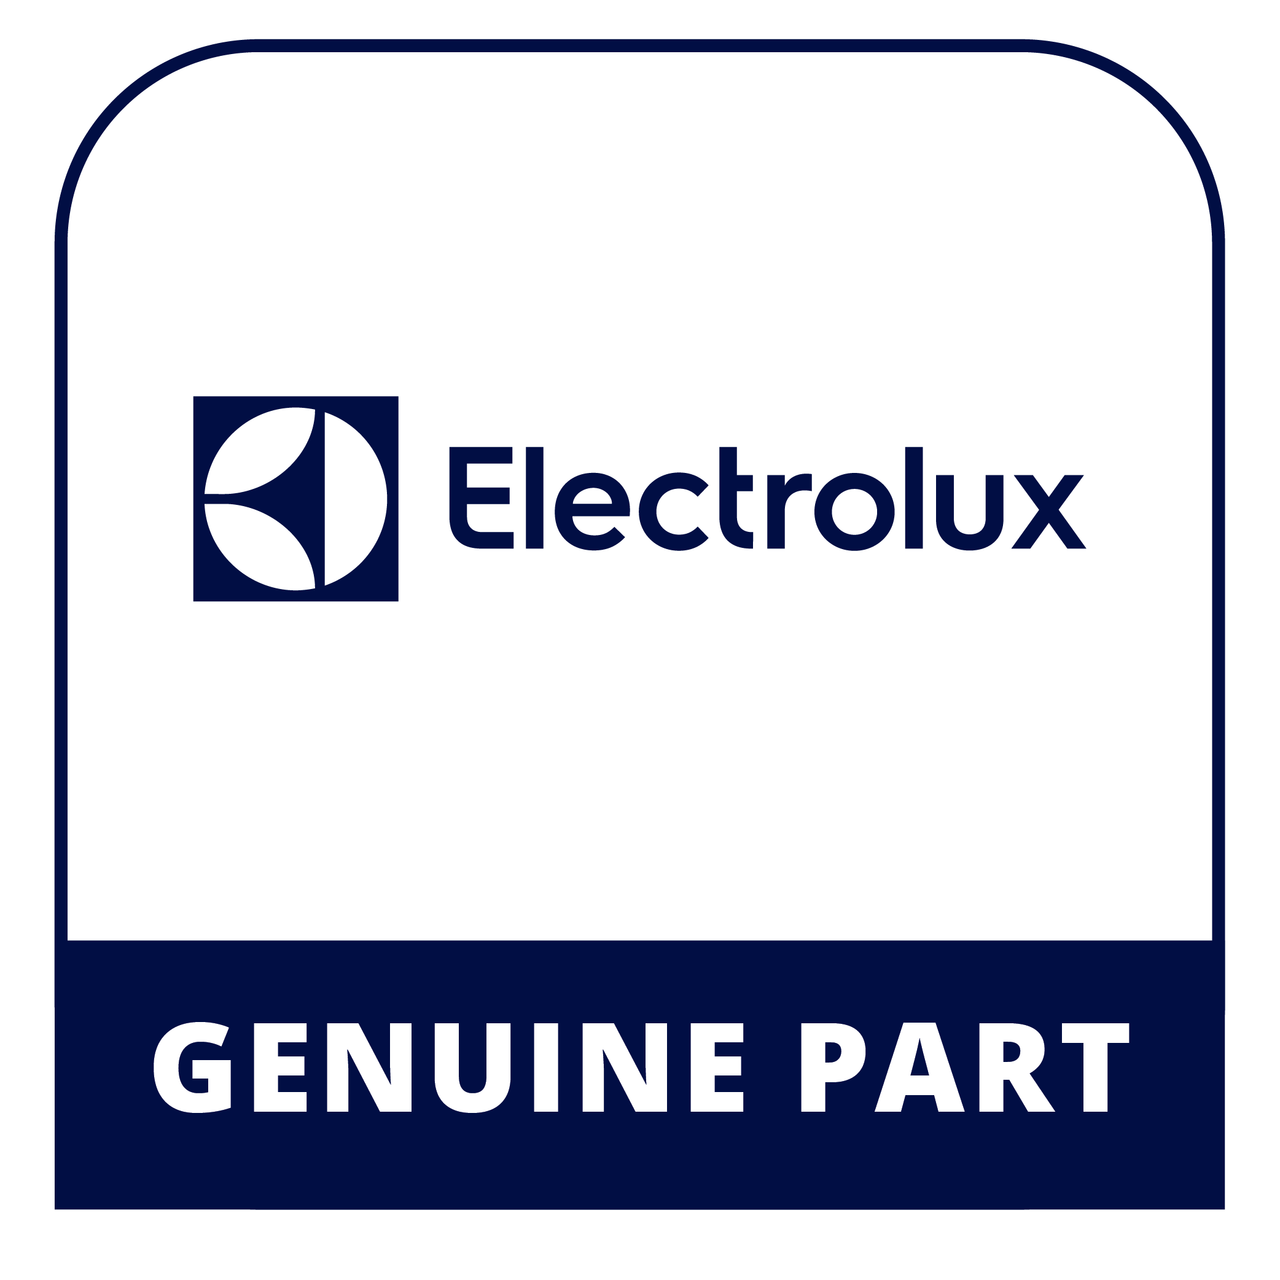 Frigidaire - Electrolux 318203845 Use & Care Guide - Genuine Electrolux Part